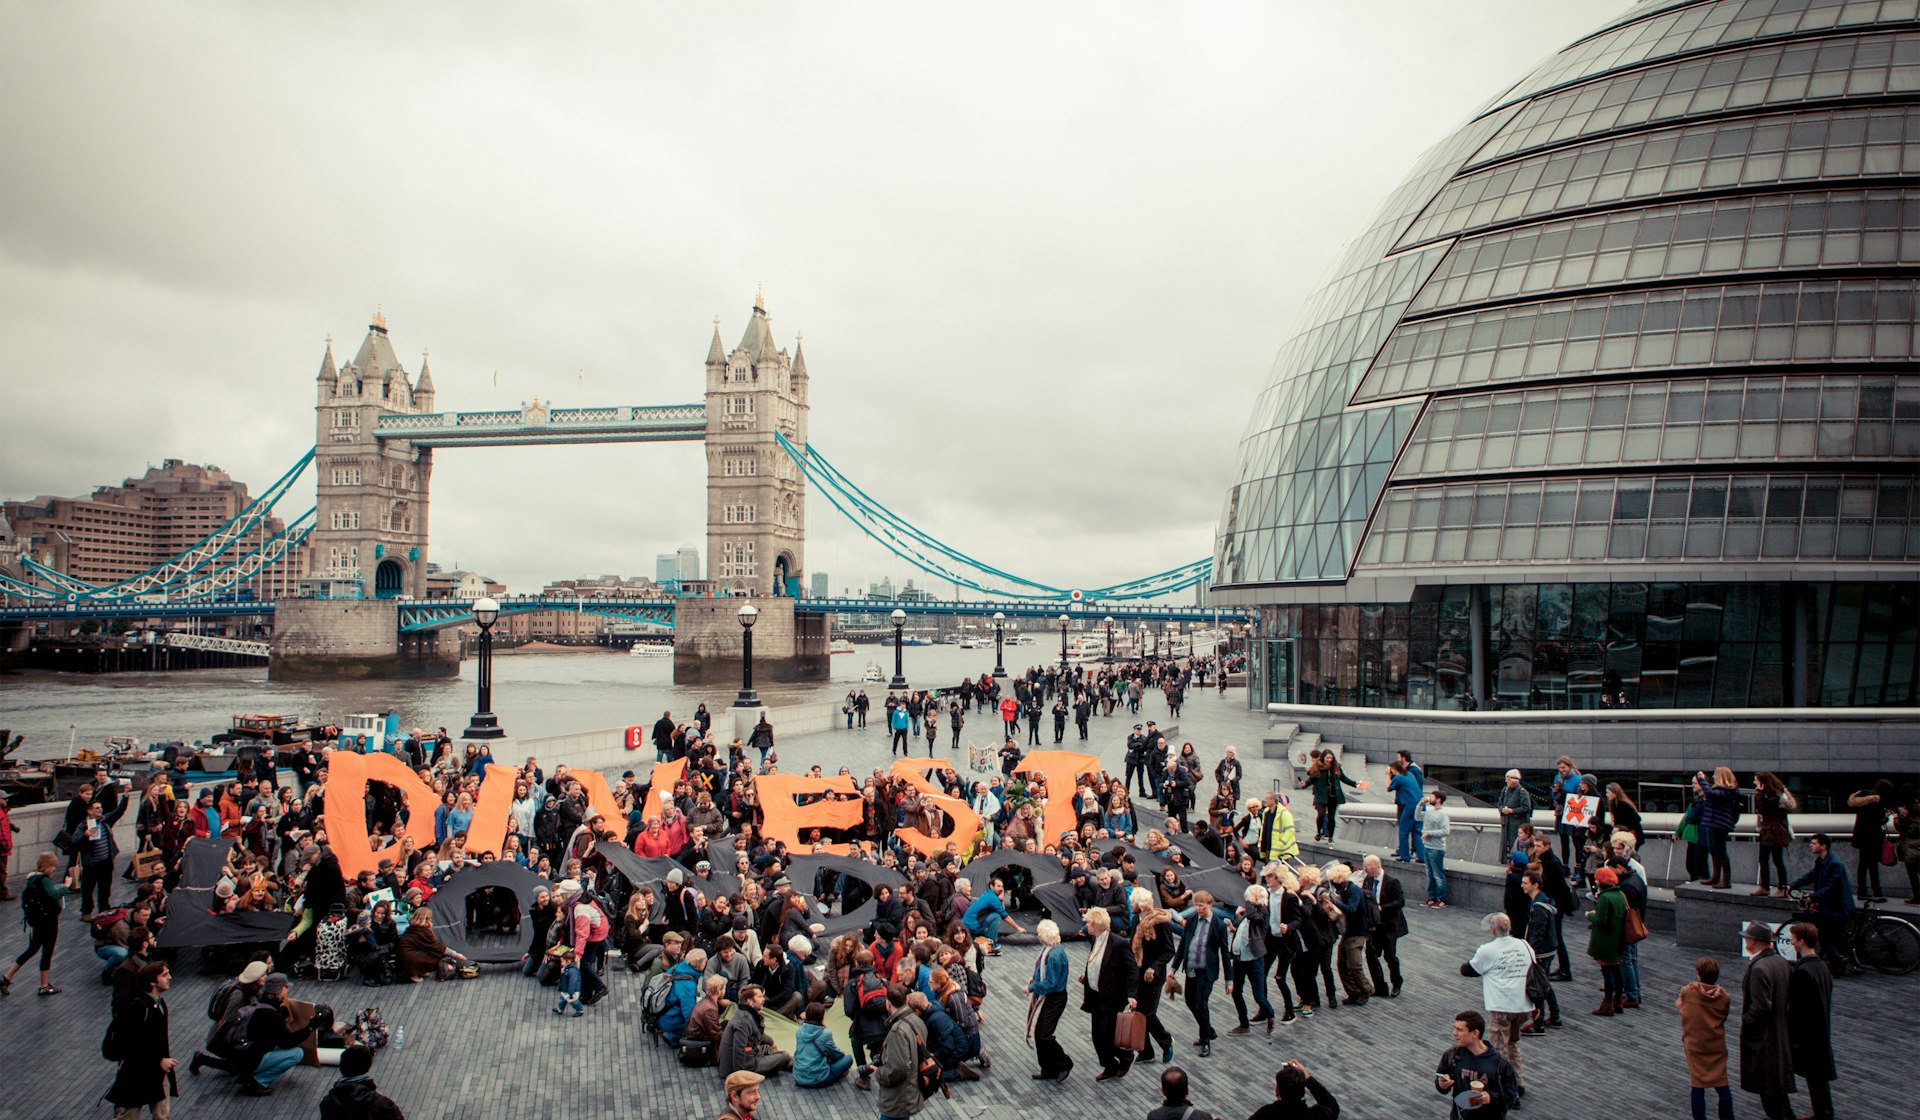 Climate change activists call on London to divest from fossil fuels